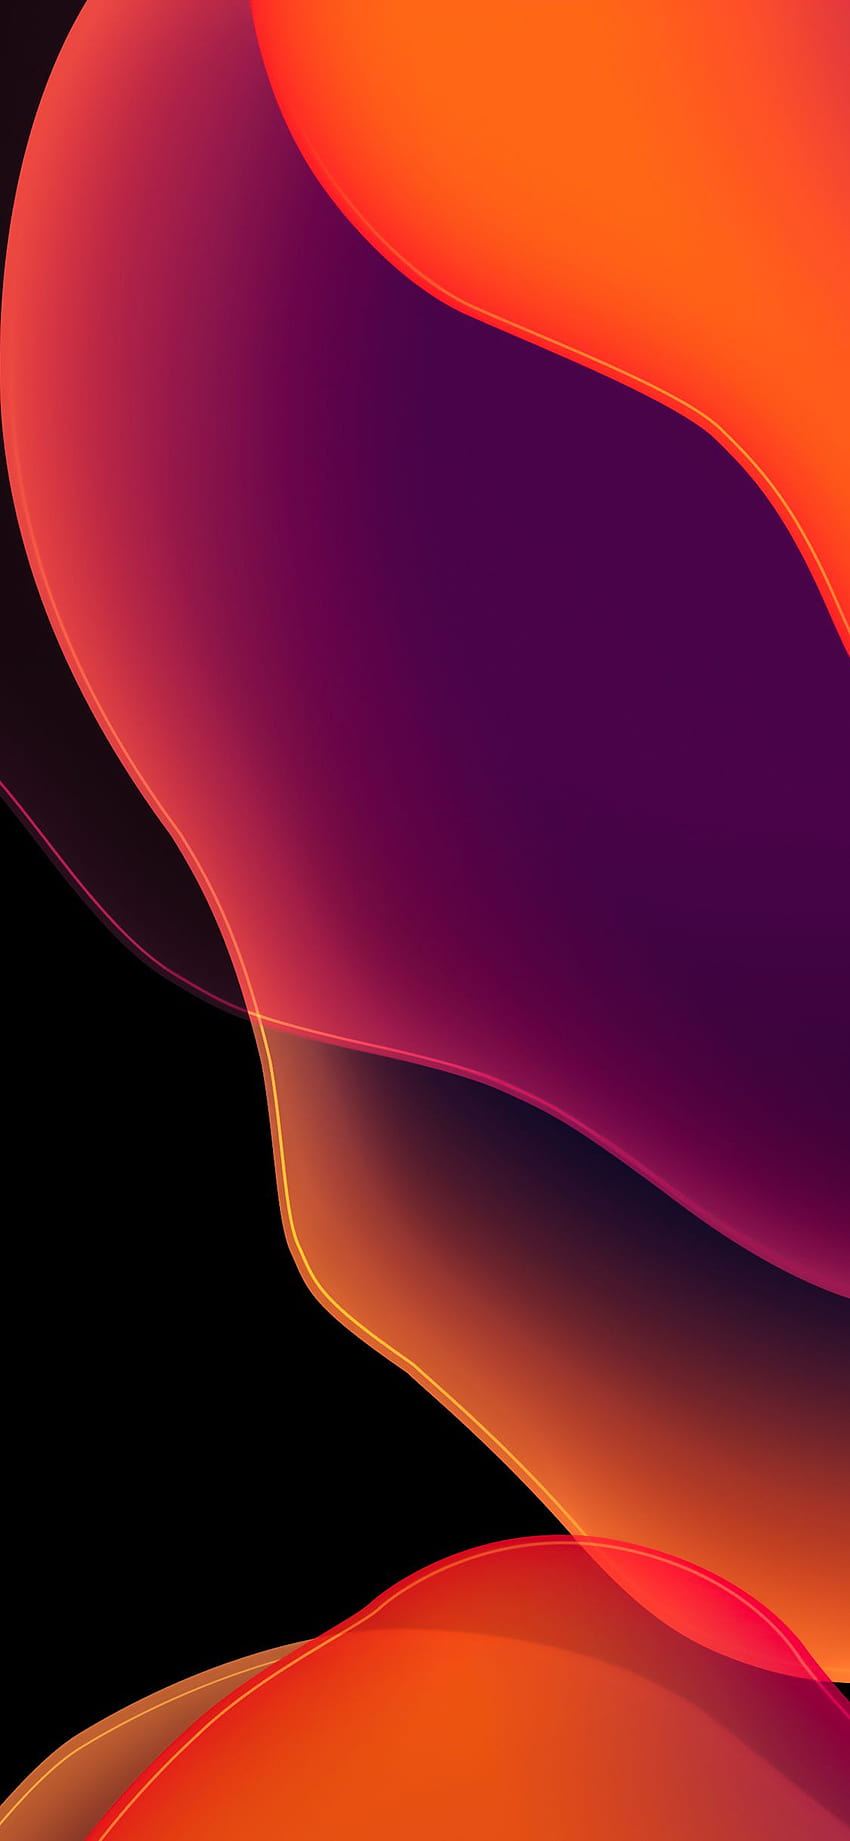 1125x2436 Apple Abstract Dark Red Iphone XS,Iphone 10,Iphone X, apple ...